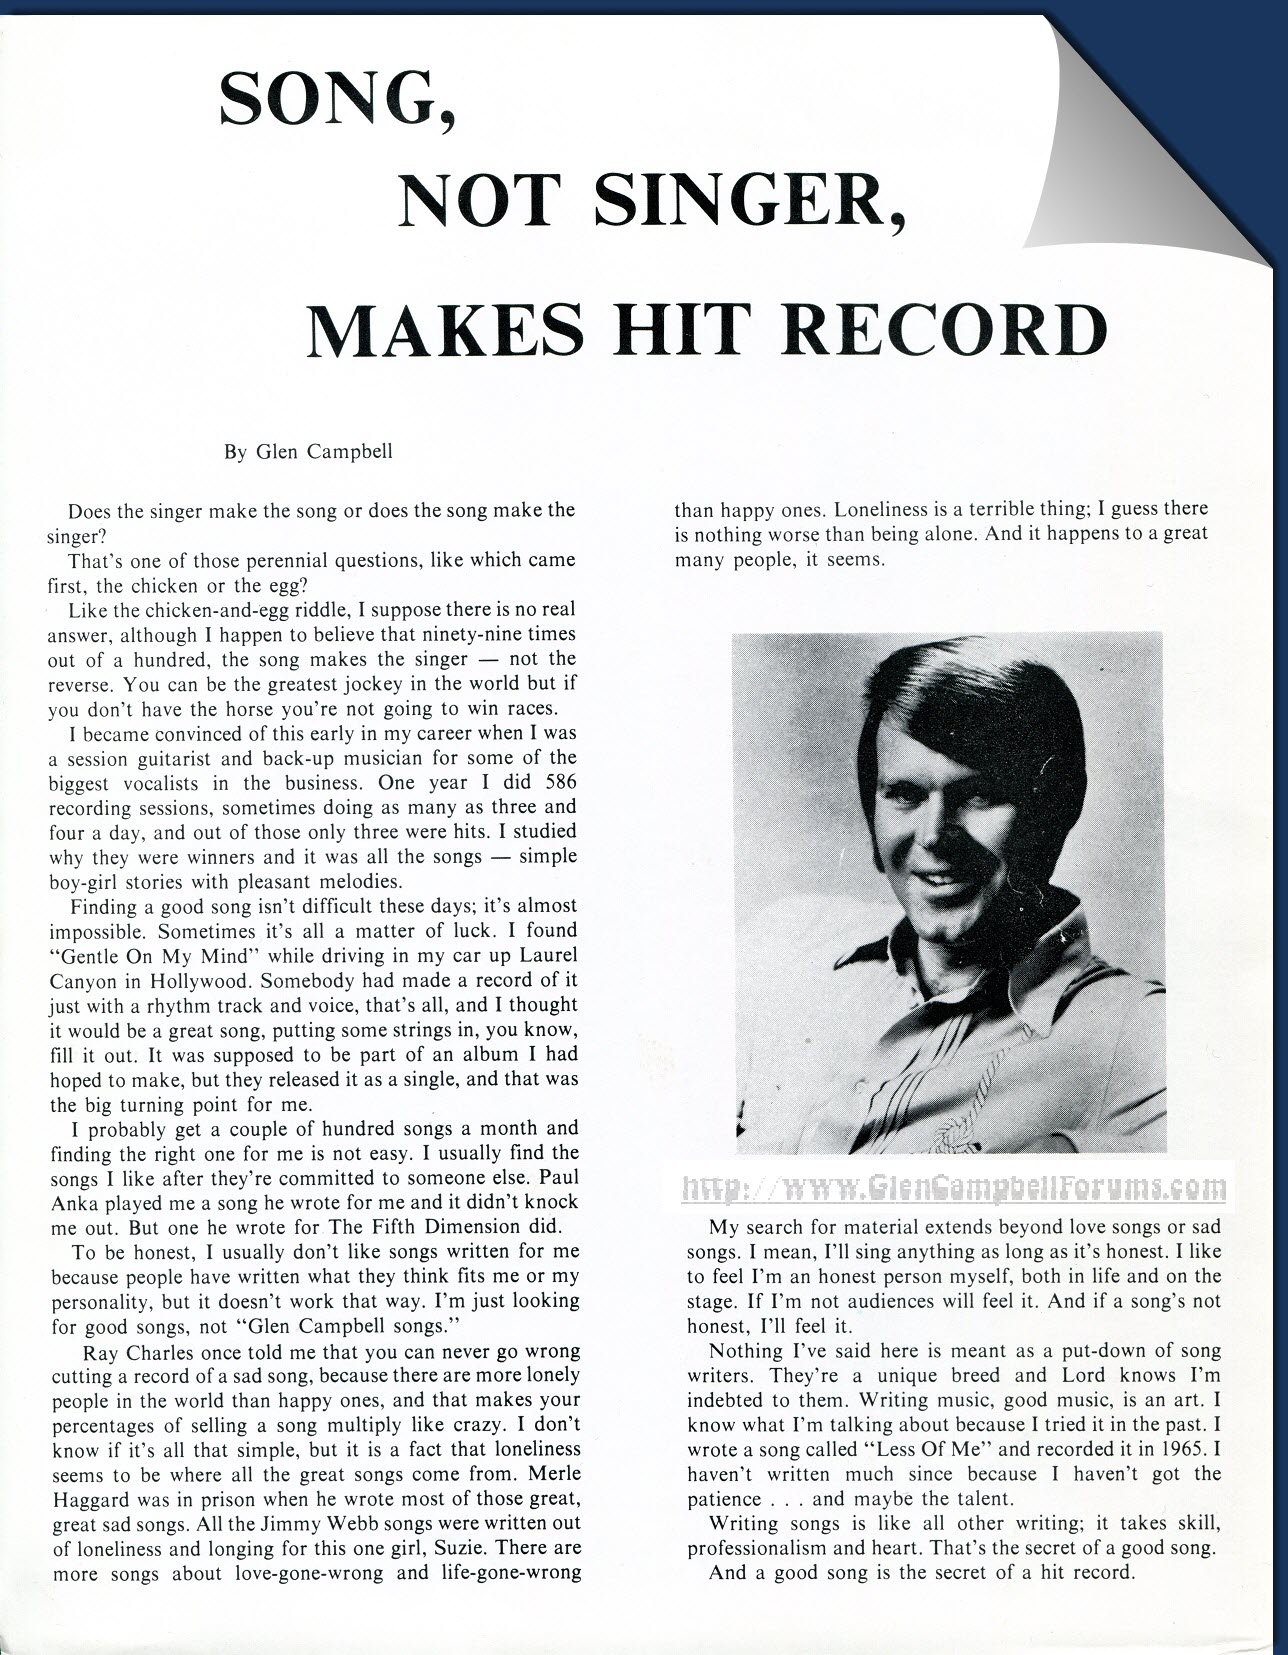 Song, Not Singer, Makes Hit Record_1970s_Official Glen Campbell International Fan Club Article-GCF on the Net-D. Zink Collection.jpg